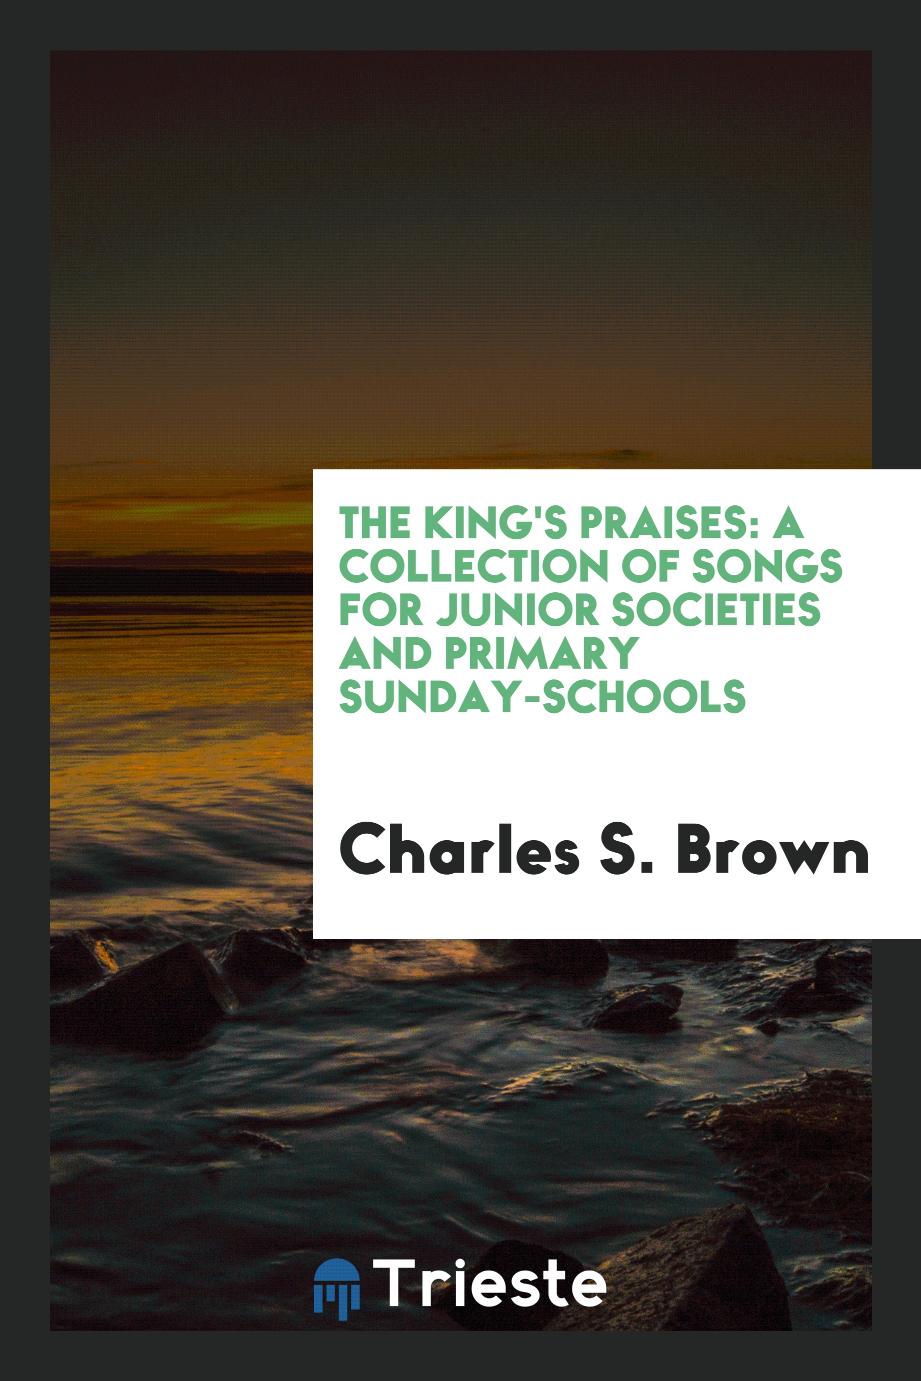 The King's Praises: A Collection of Songs for Junior Societies and Primary Sunday-schools